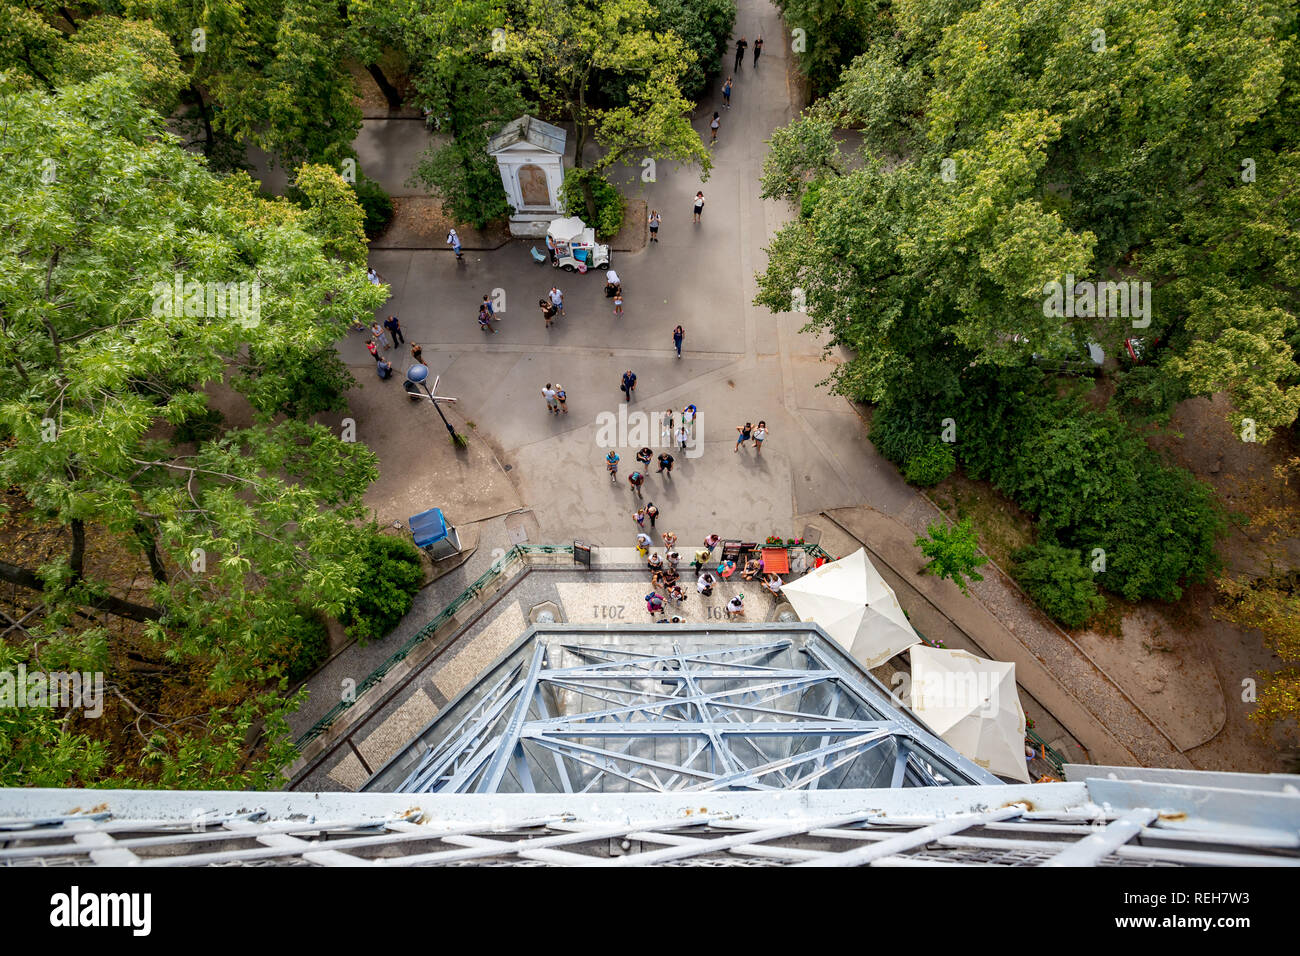 PRAGUE, CZECH REPUBLIC - AUGUST 28, 2015: Several tourists wait to enter Petrin observation and lookup tower in Petrin park in West Prague, Czech Repu Stock Photo